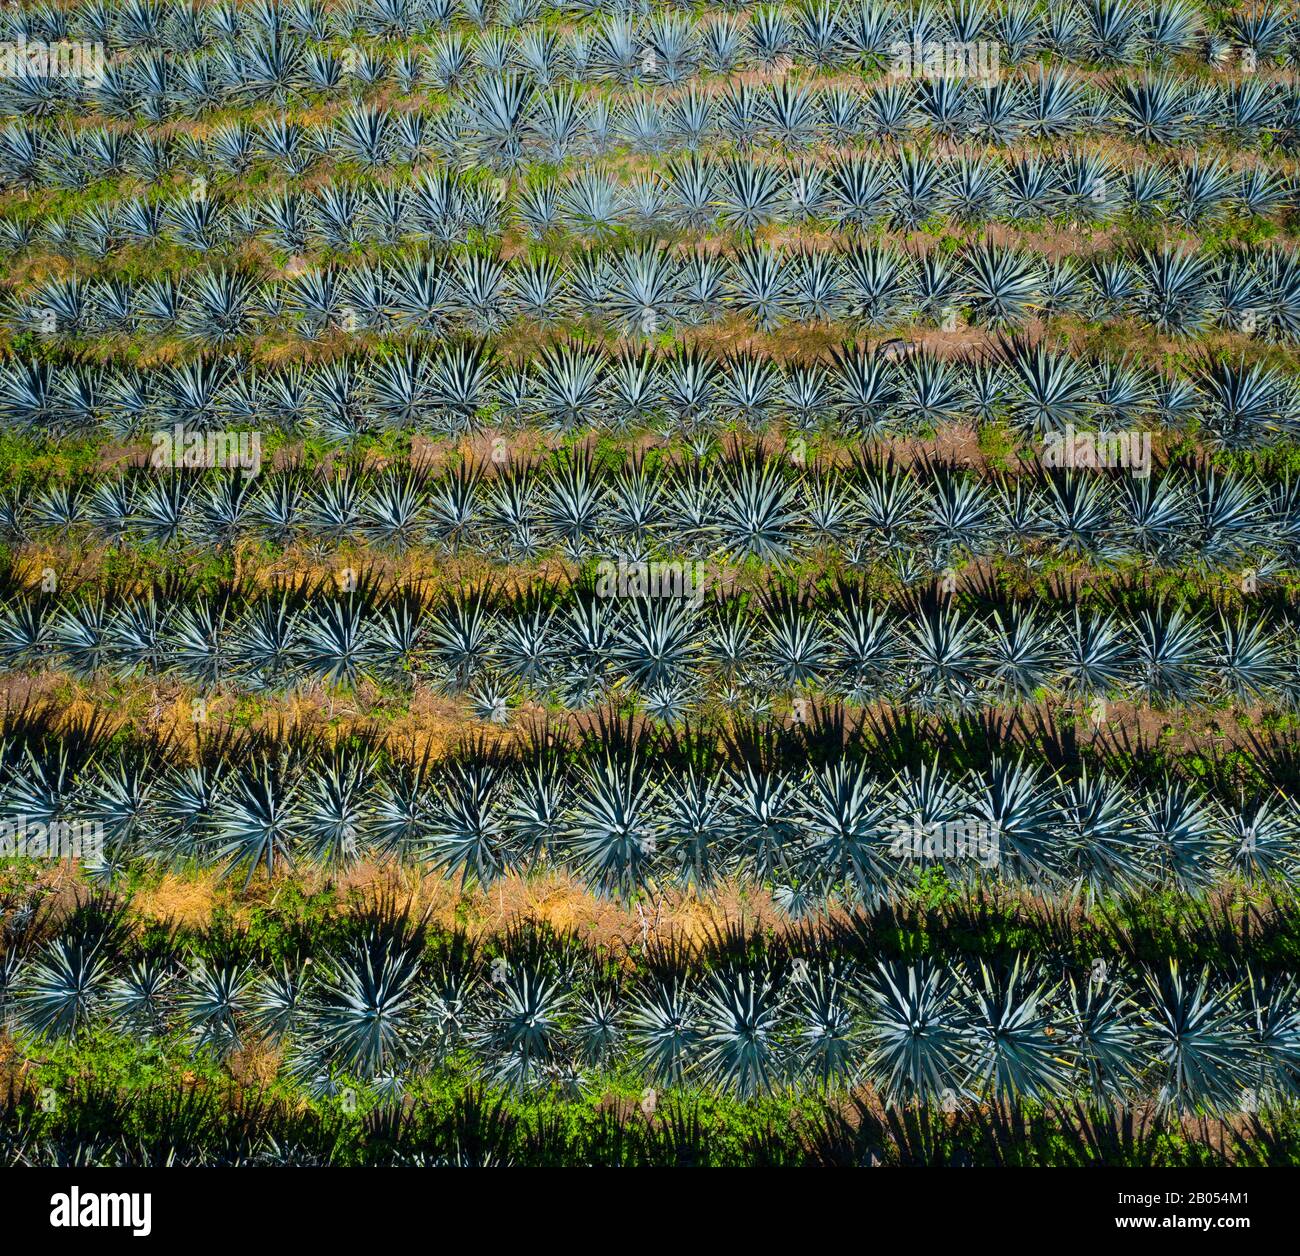 Blue agave, tequila agave, Agave tequilana, Tepic, Riviera Nayarit, Nayarit state, Mexico, Central America, America Stock Photo